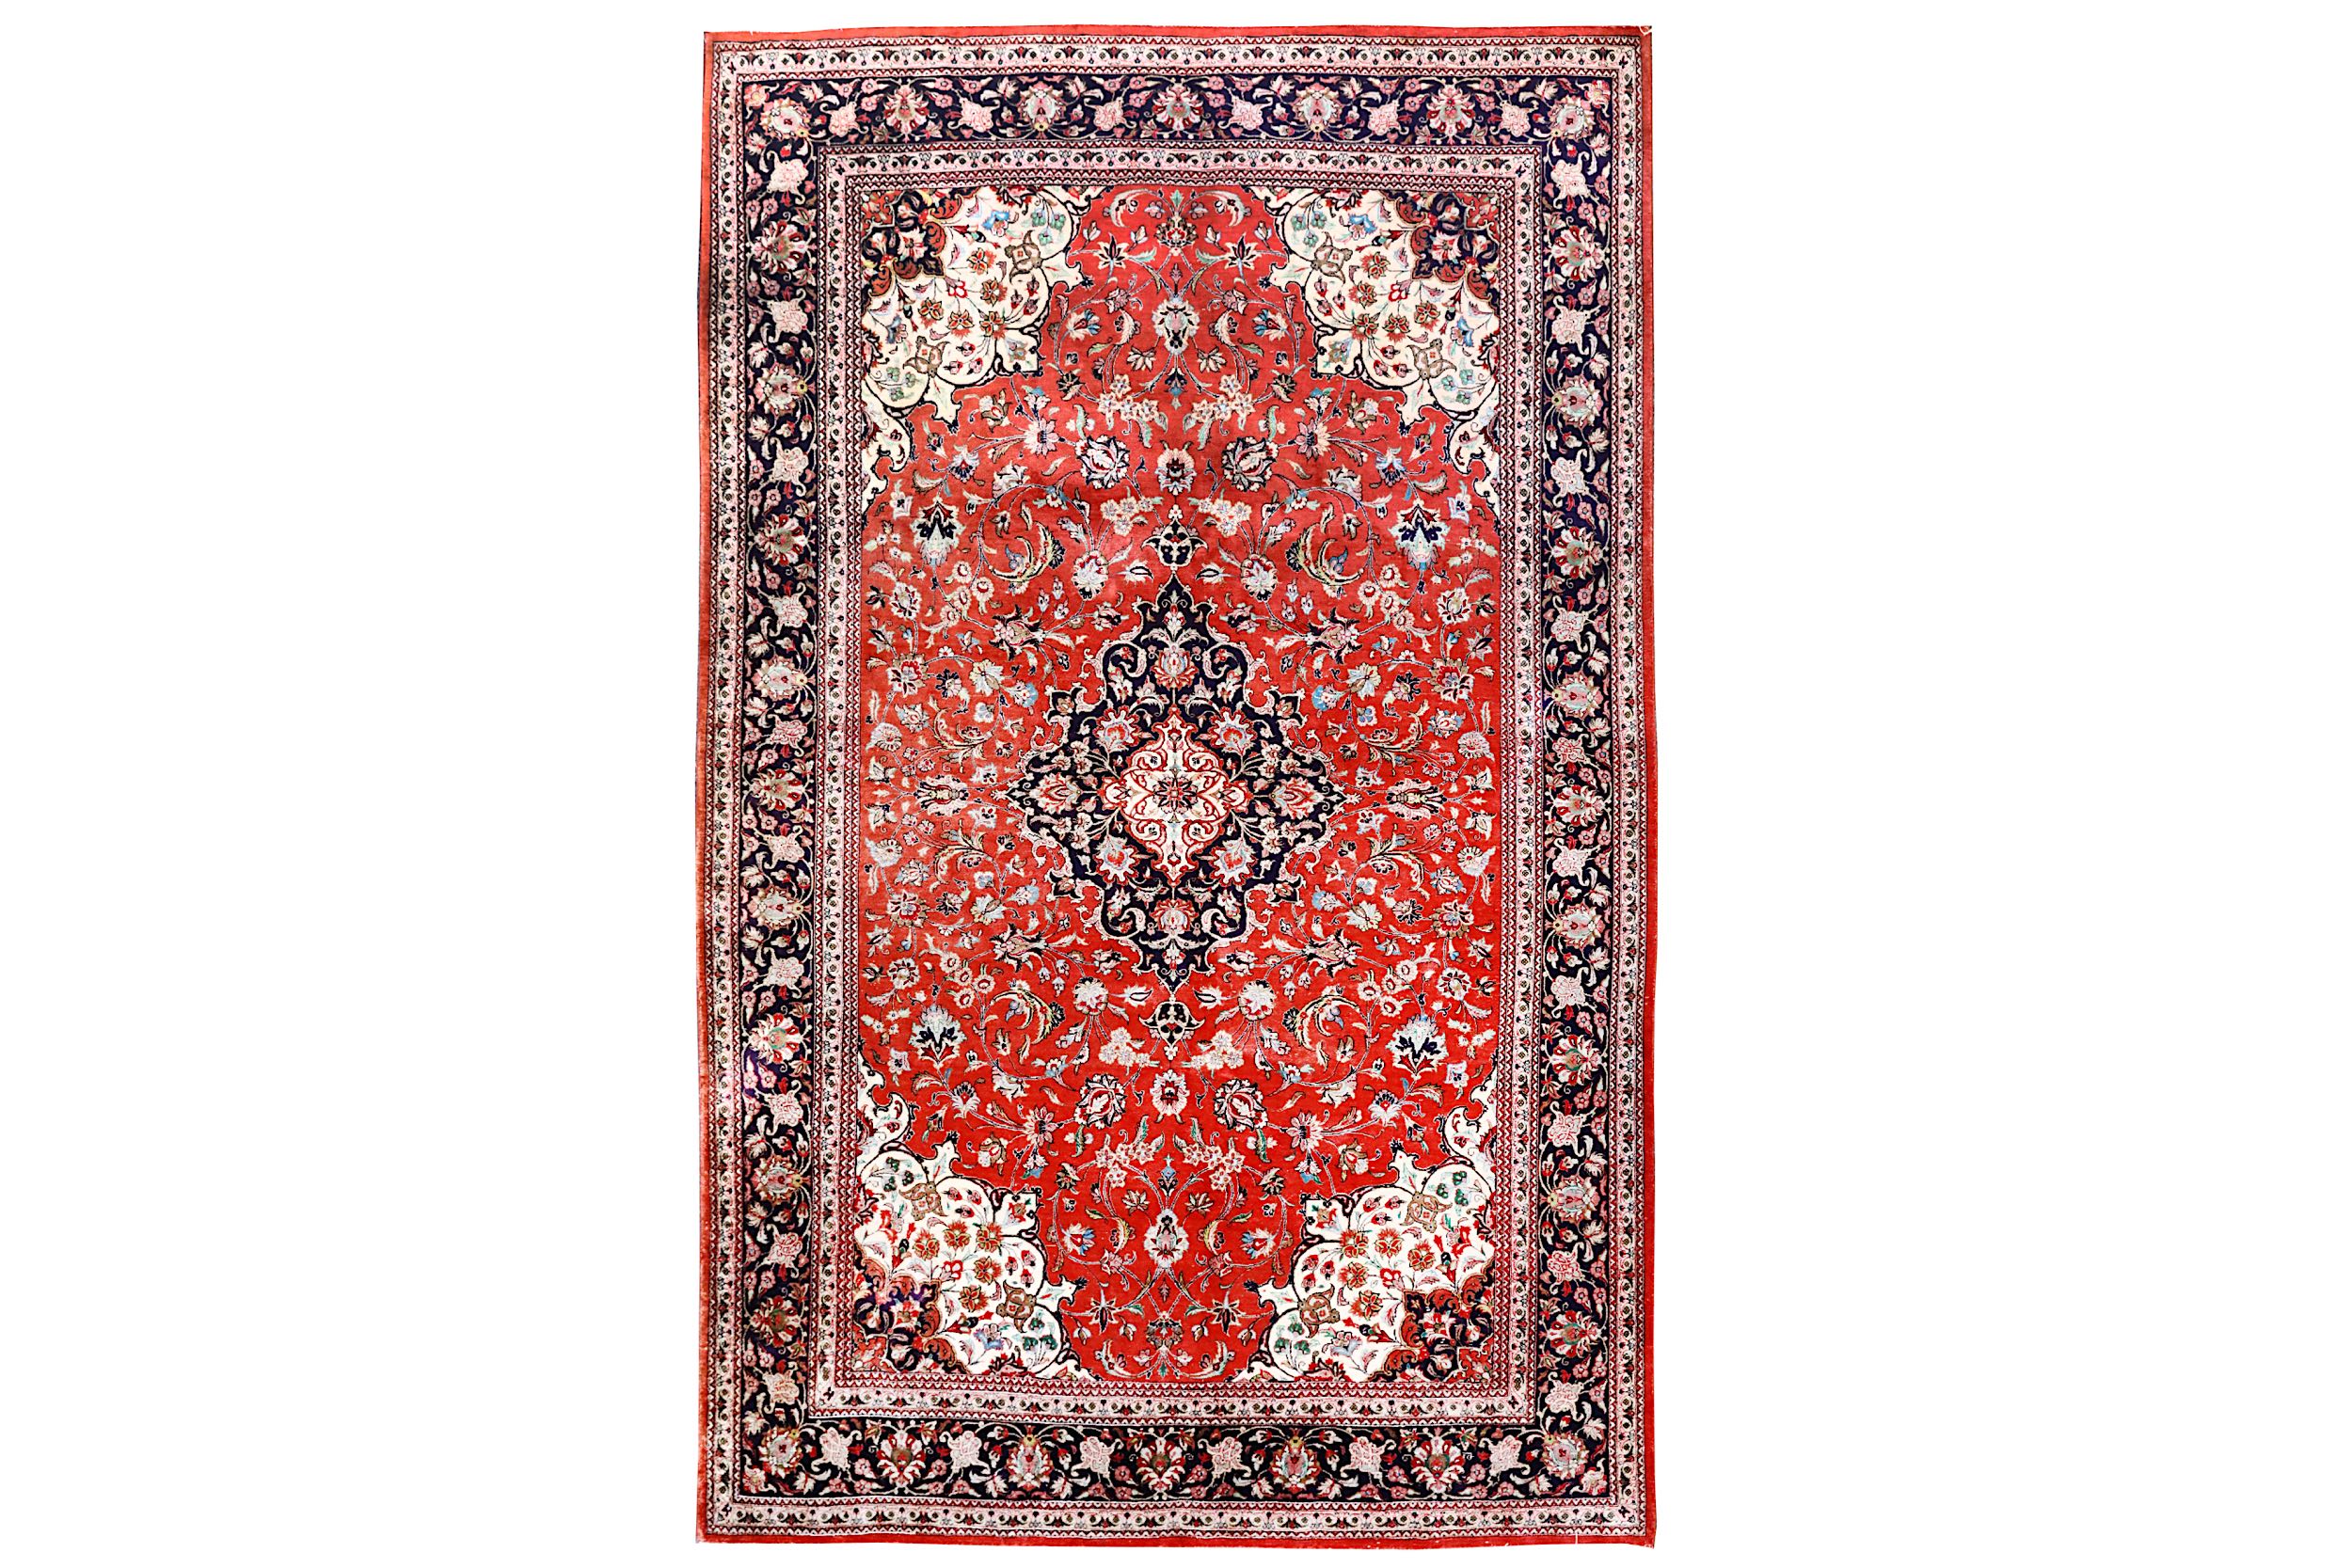 AN EXTREMELY FINE SILK QUM RUG, CENTRAL PERSIA approx: 7ft.1in. x 4ft.4in.(215cm. x 132cm.) The